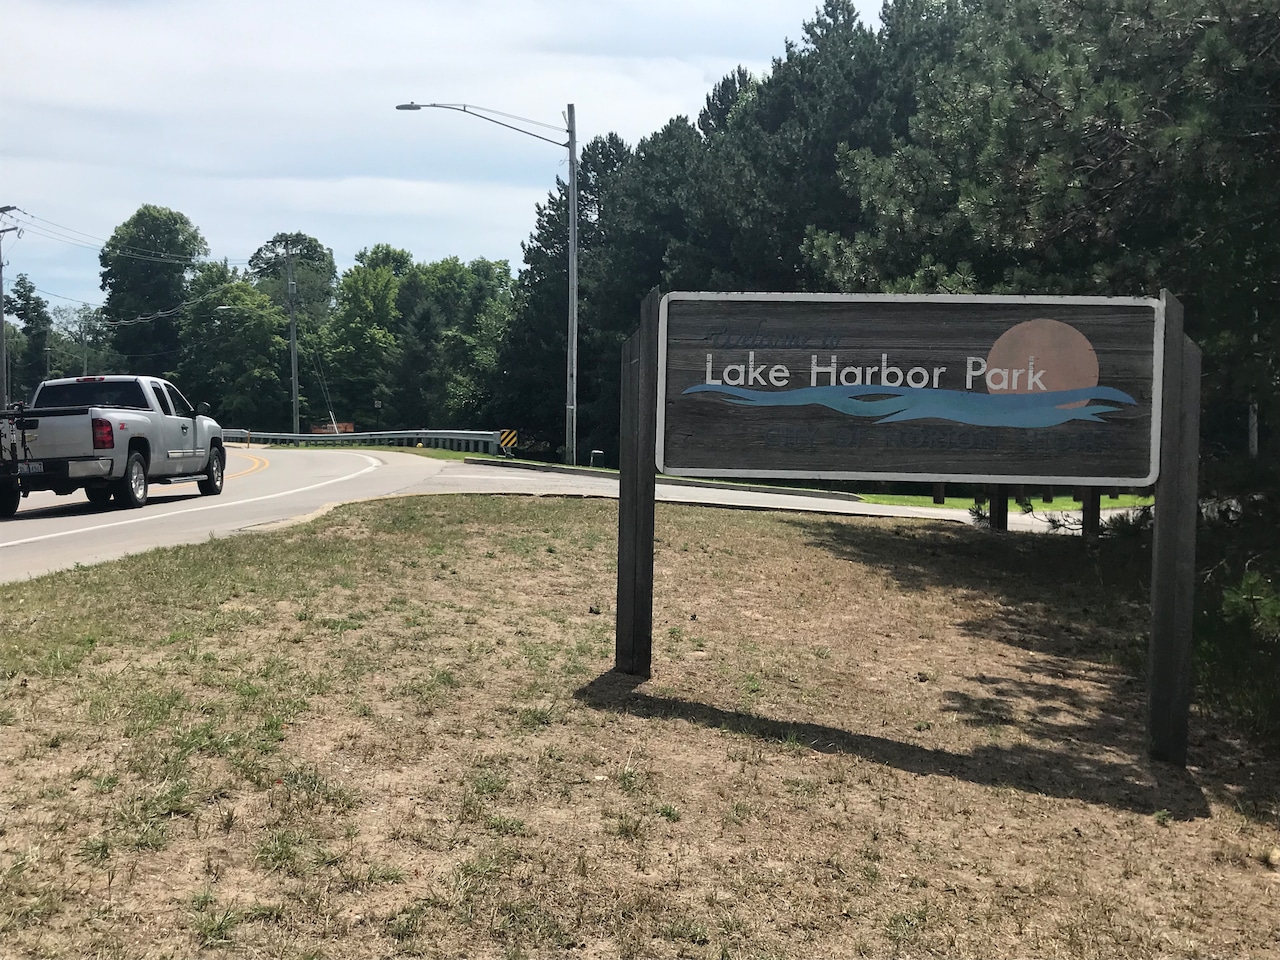 Scientist advises small children, pets stay out of water at Lake Harbor Park [Video]